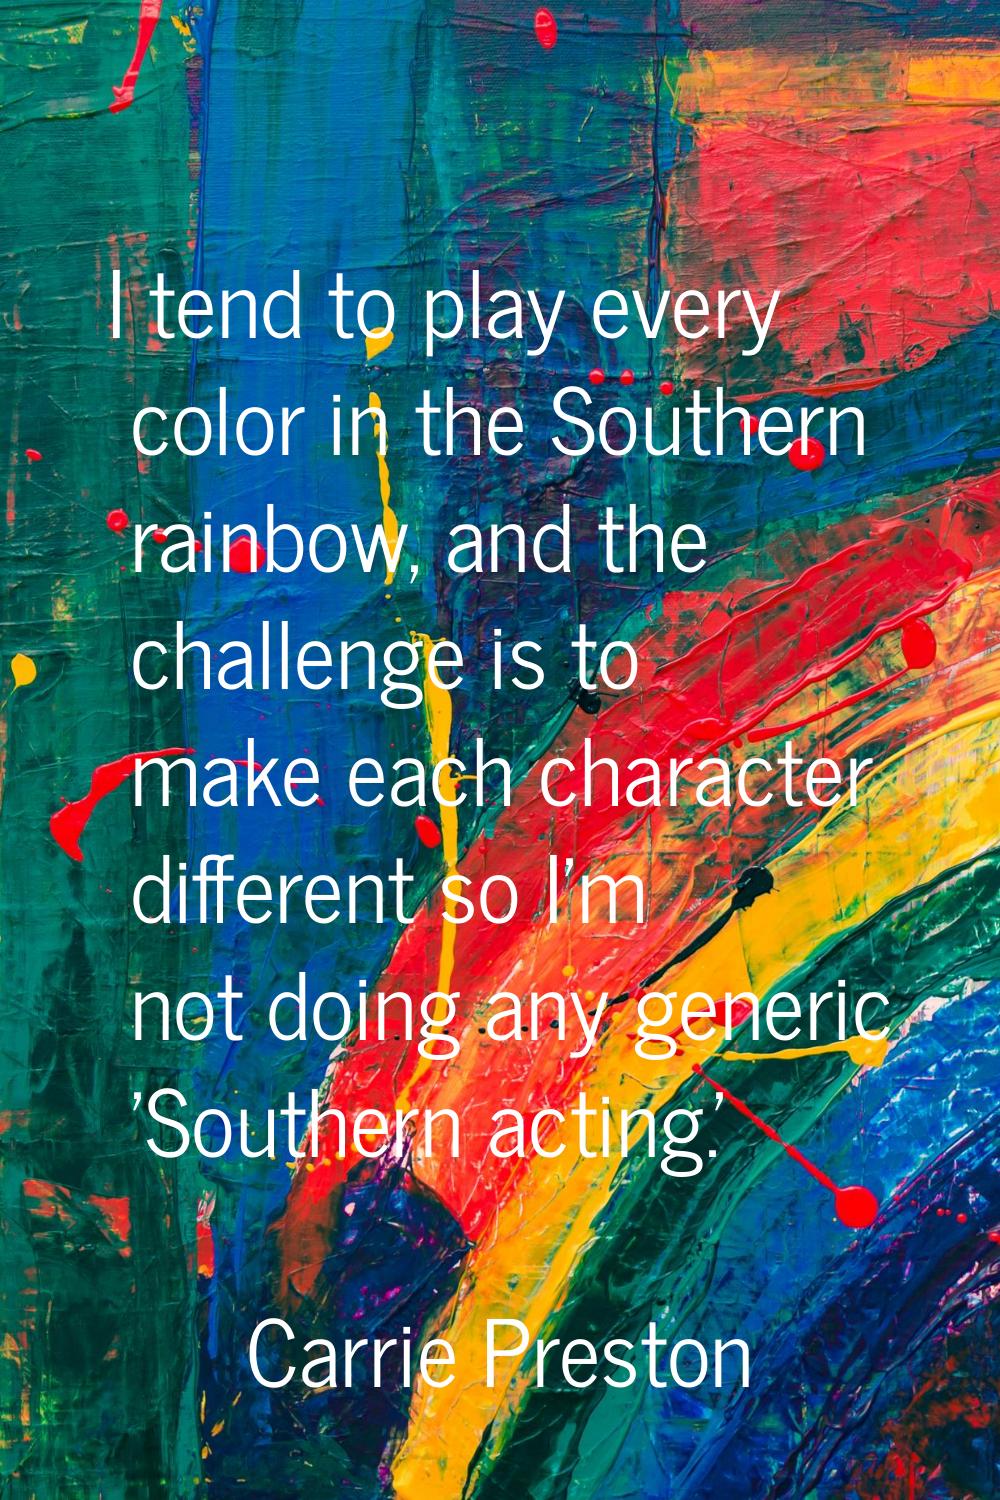 I tend to play every color in the Southern rainbow, and the challenge is to make each character dif